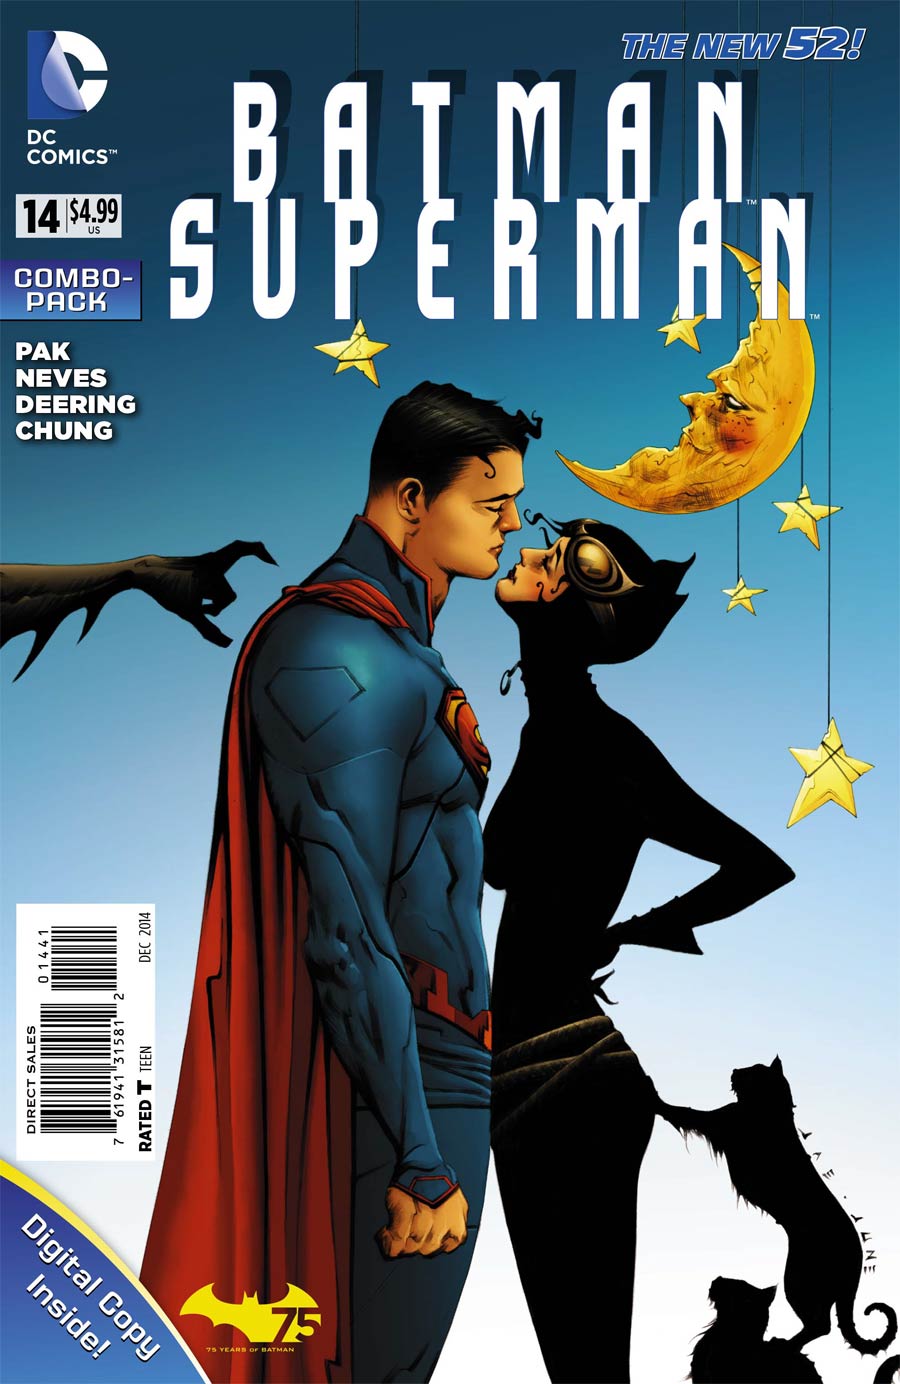 Batman Superman #14 Cover D Combo Pack Without Polybag